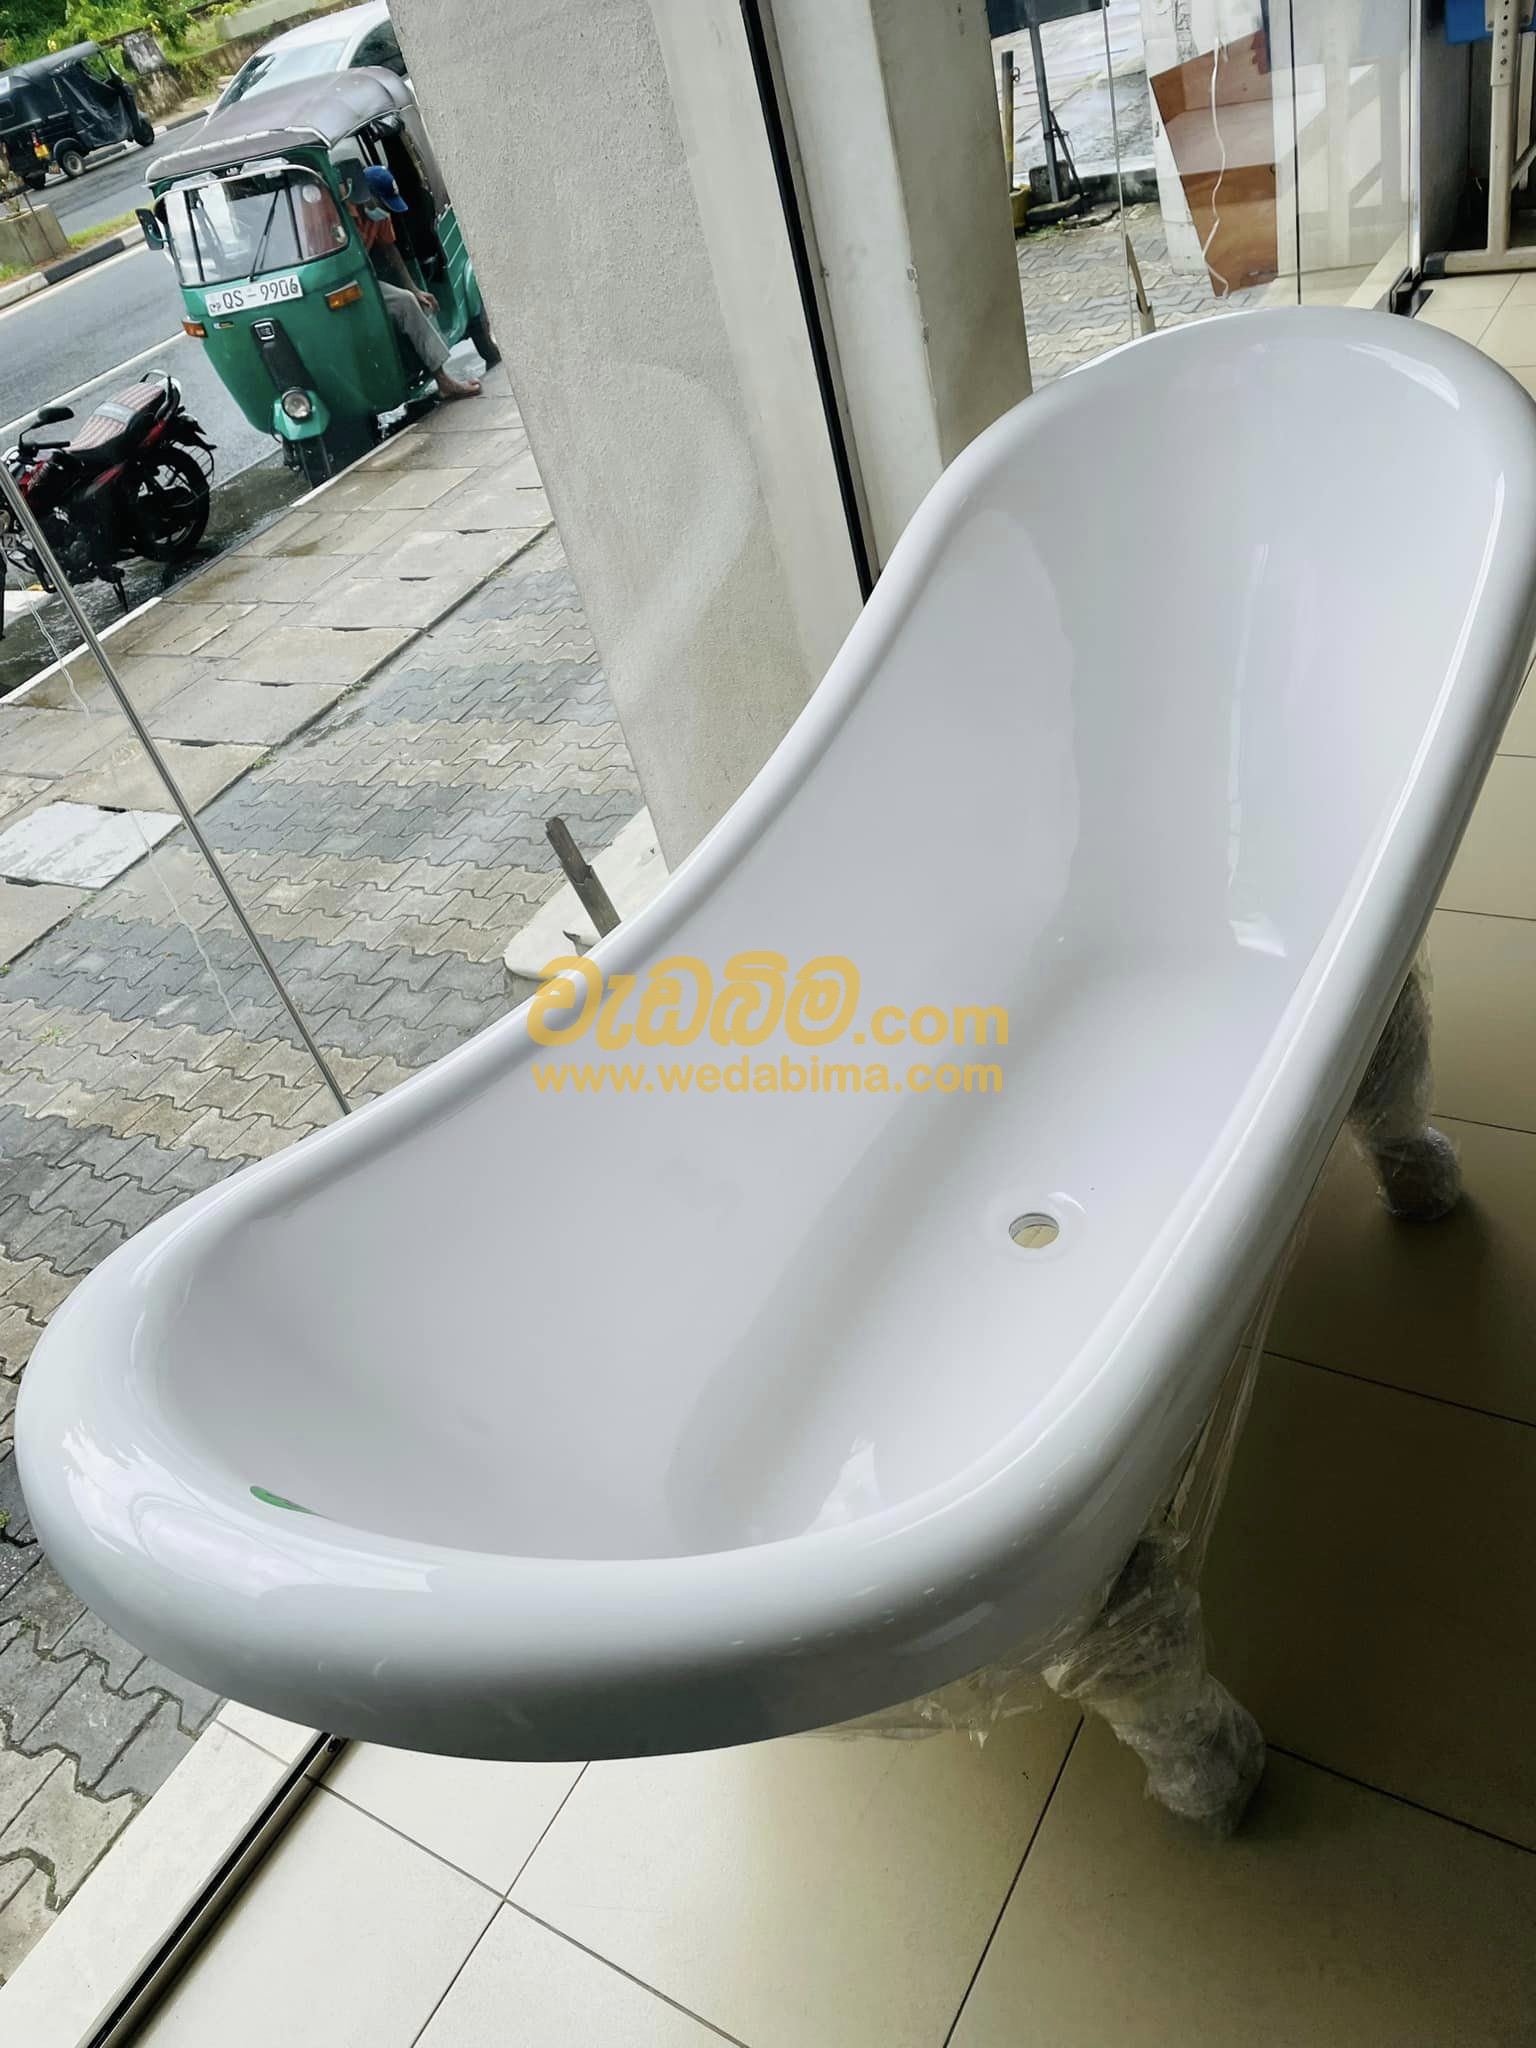 Bathtubs Price In Kandy